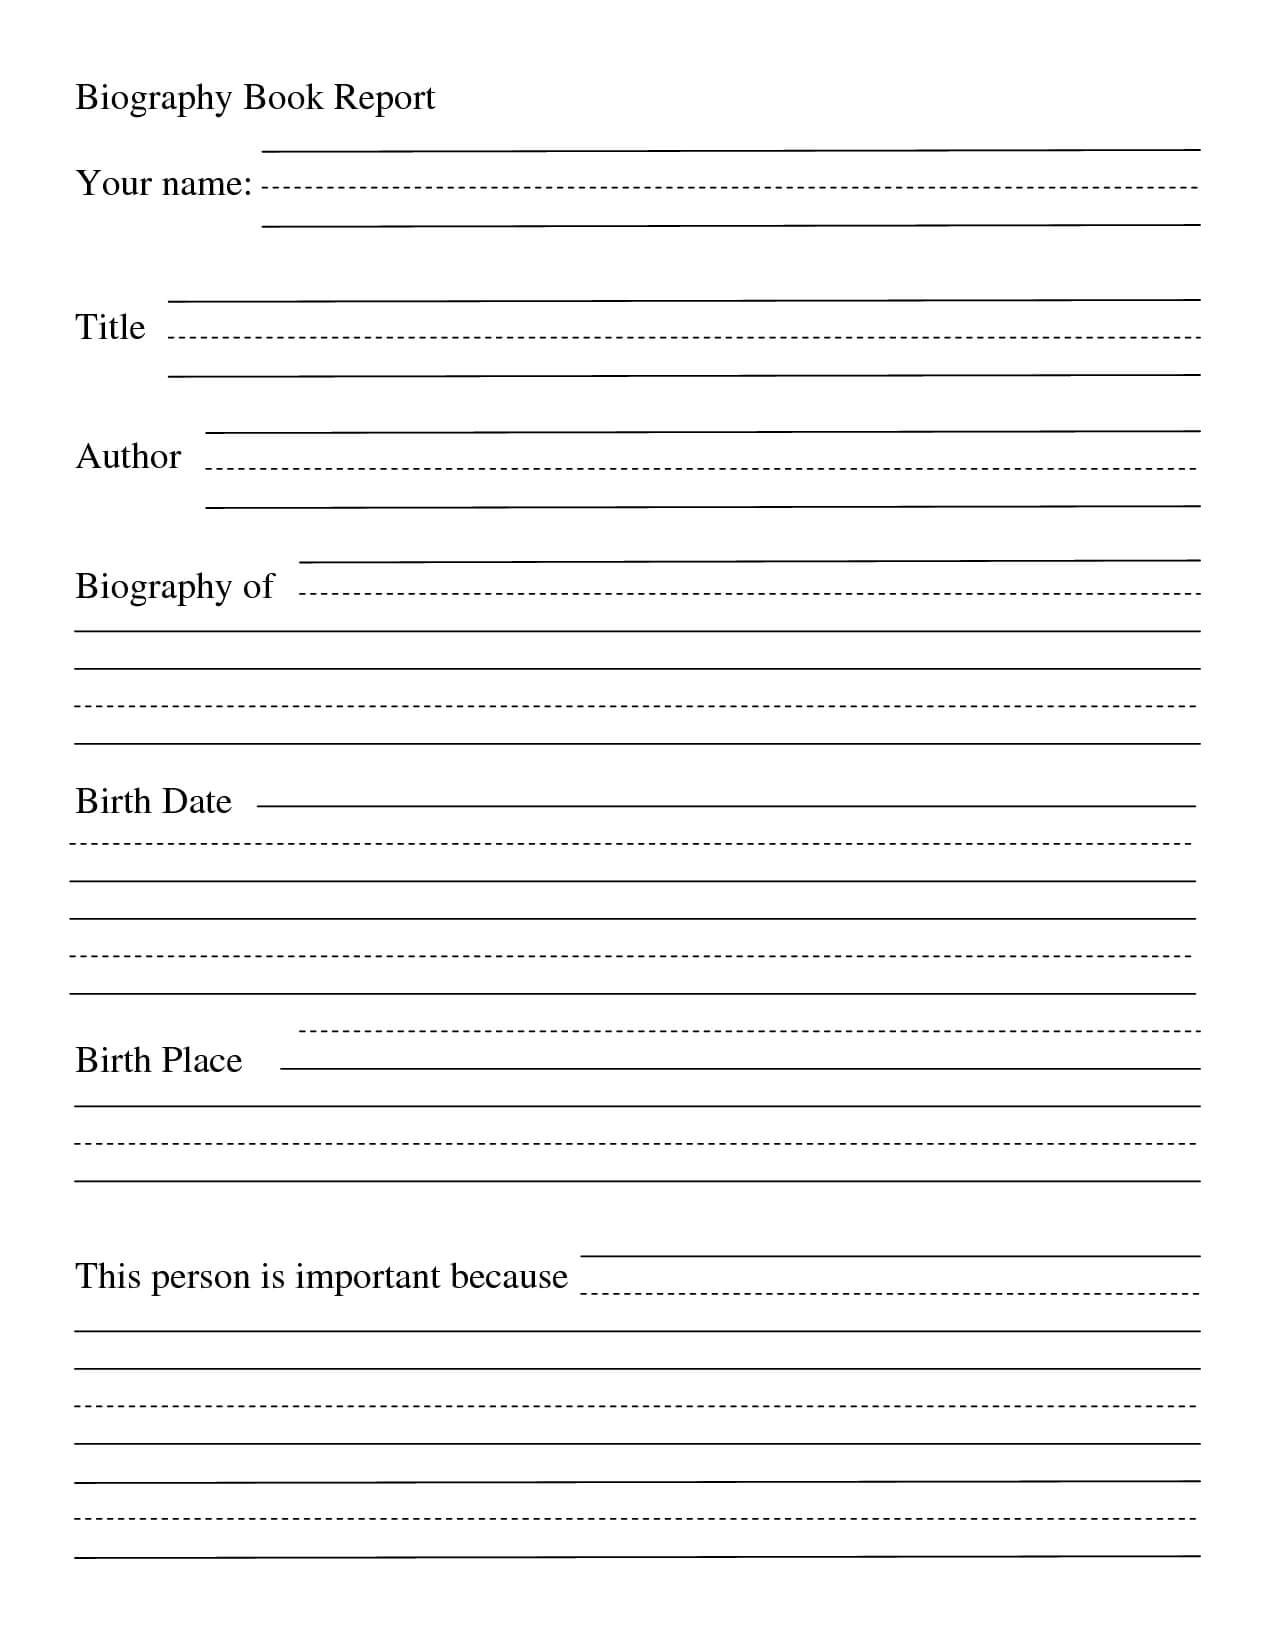 004 Biography Book Report Template Formidable Ideas Format Intended For Biography Book Report Template